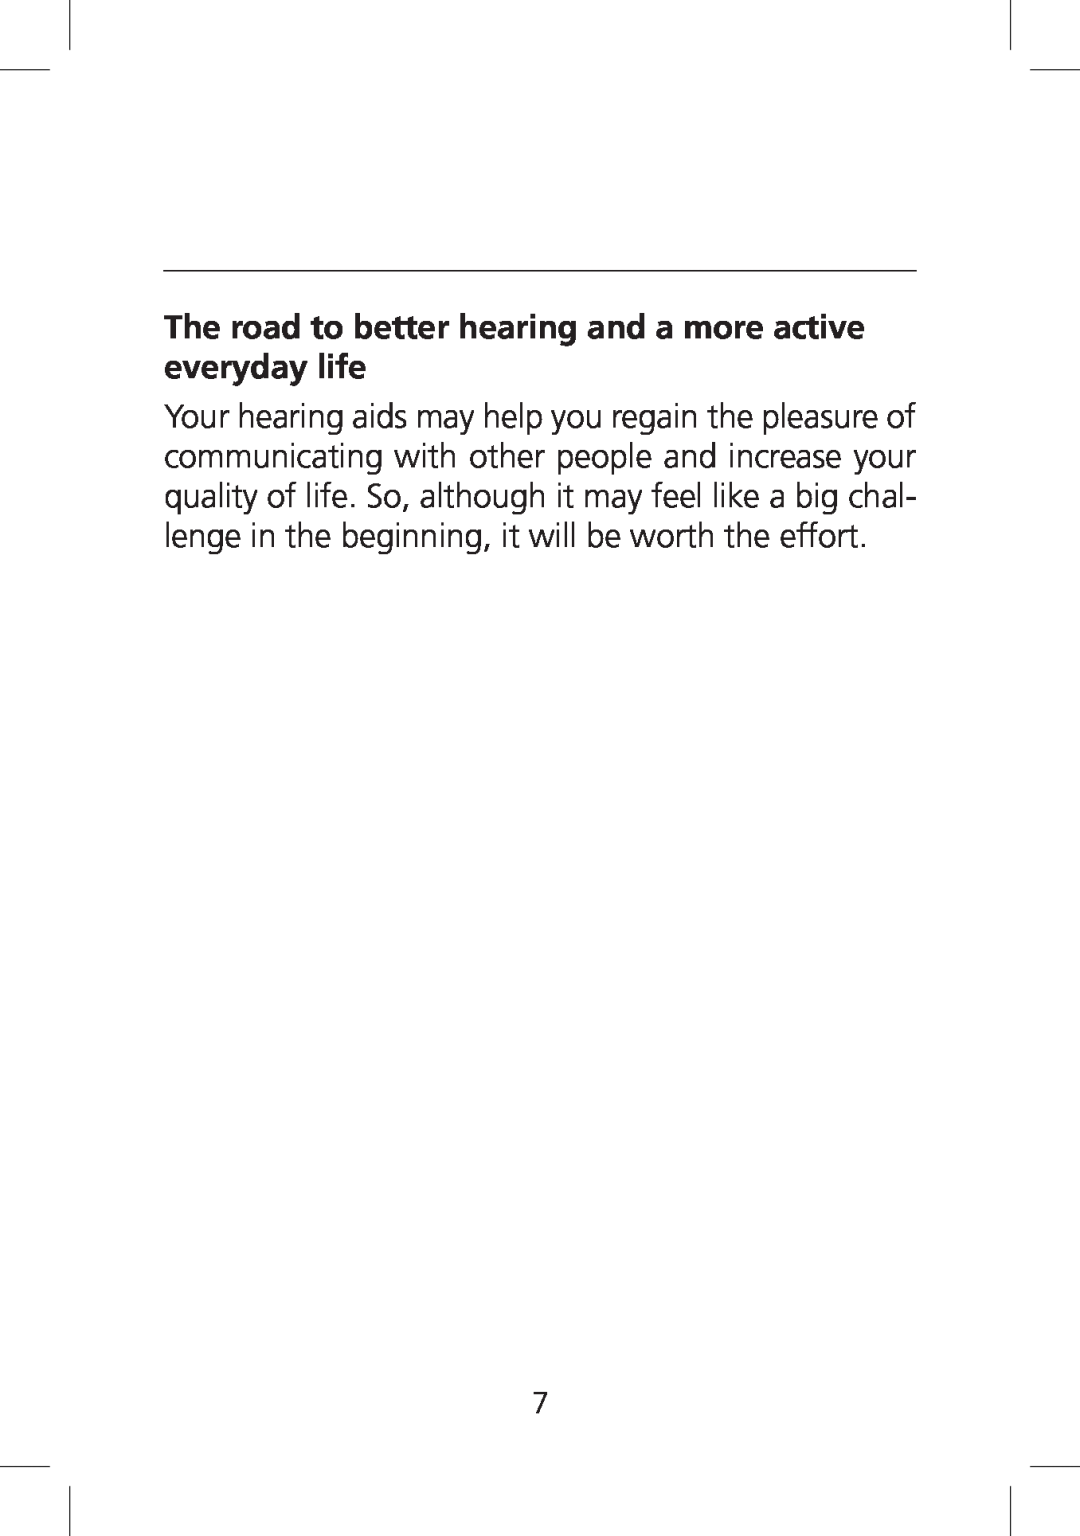 SV Sound SV-19 manual The road to better hearing and a more active everyday life 